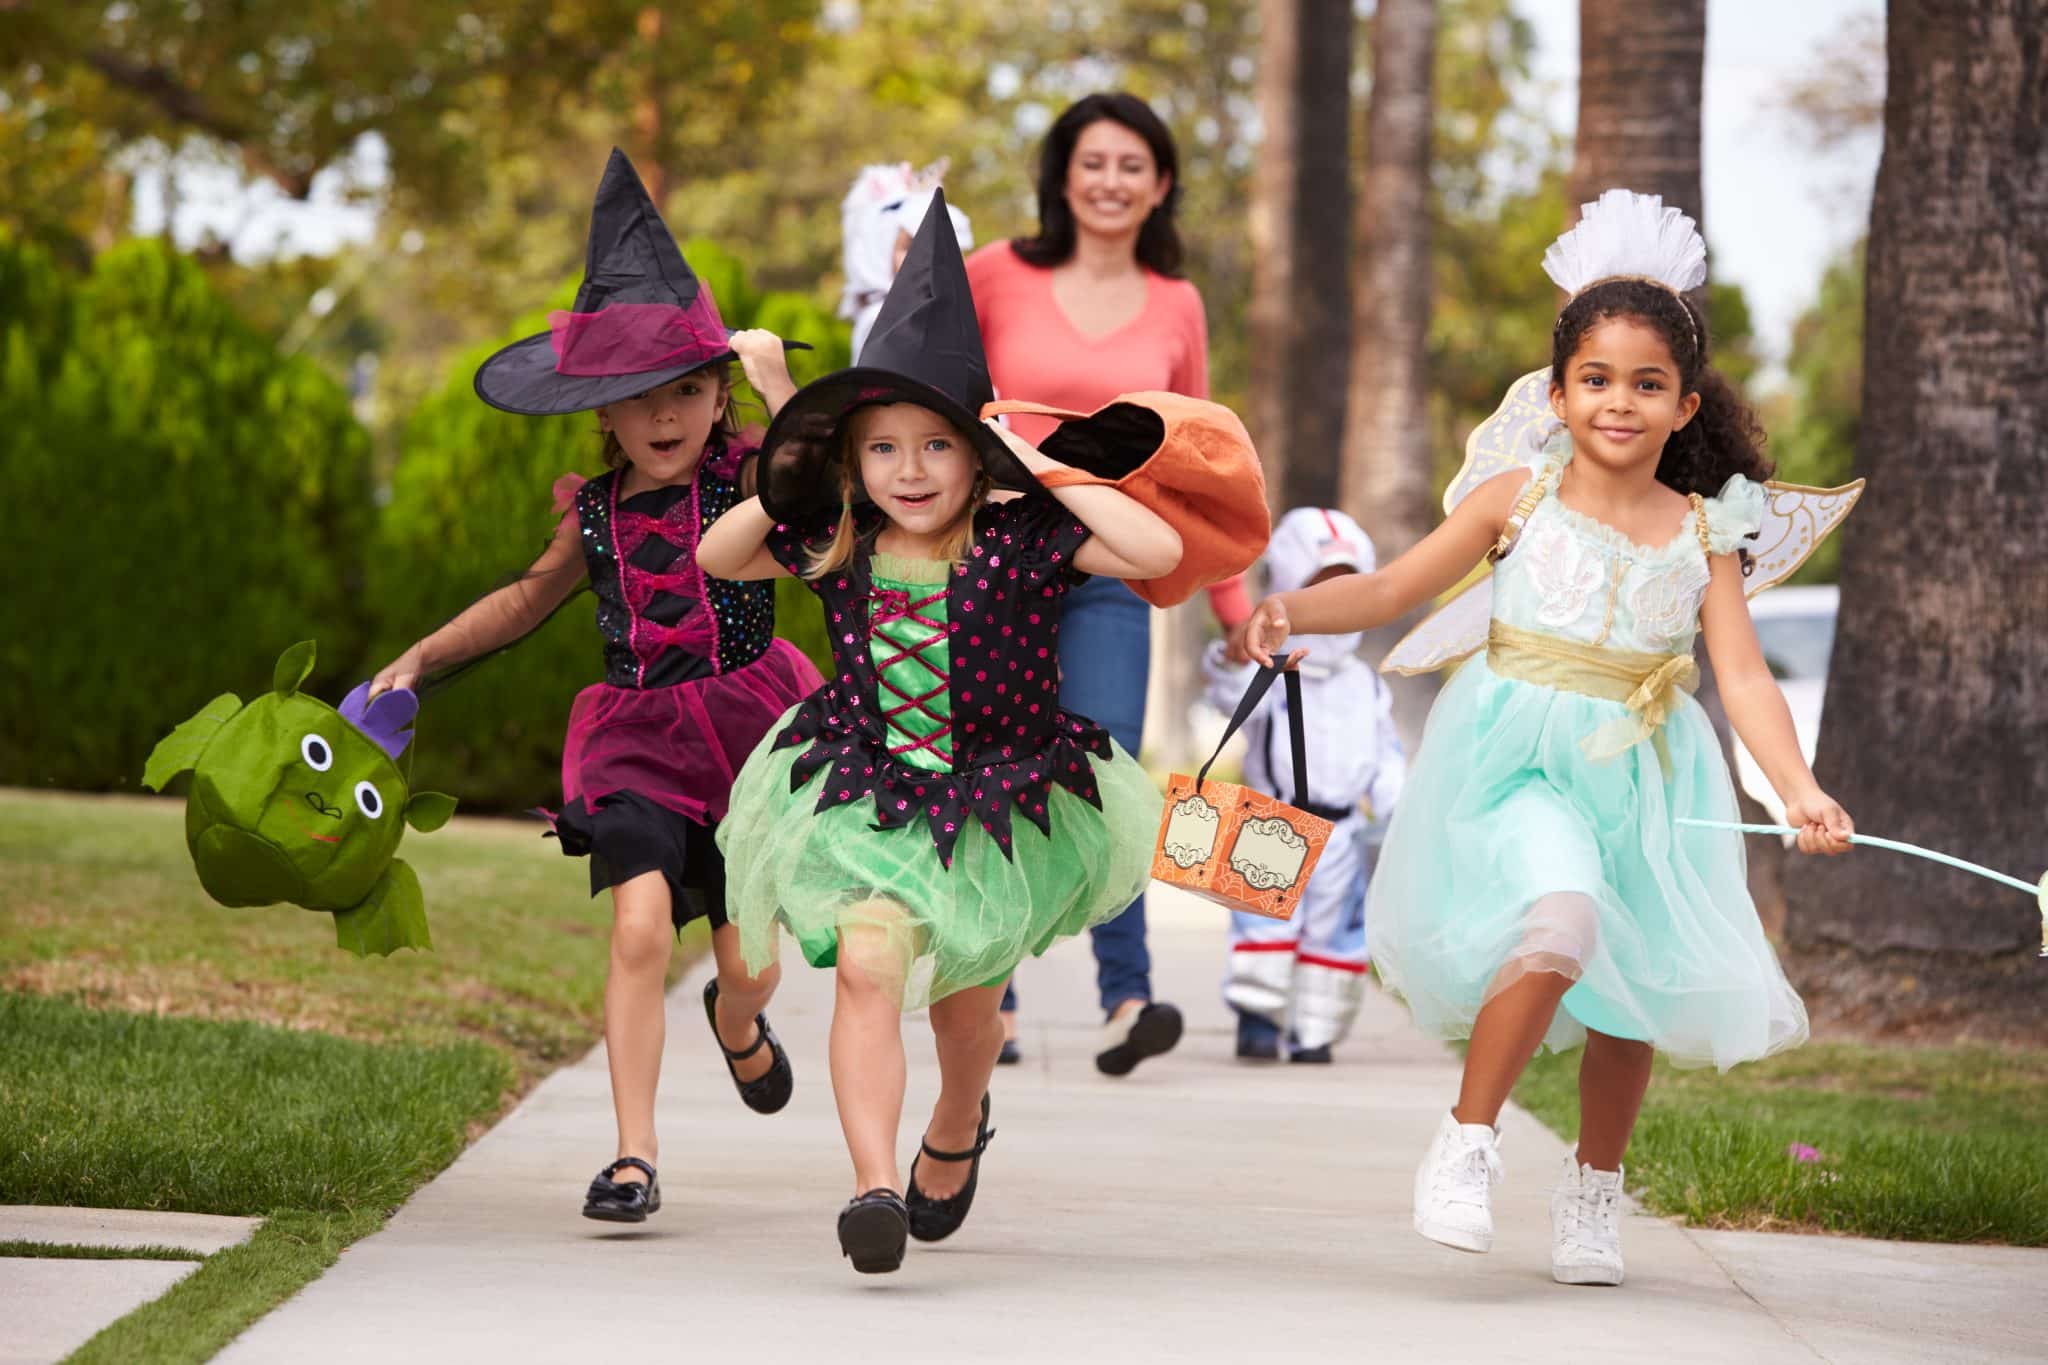 3 girls dressed in halloween costumes trick or treating with the mom trailing behind